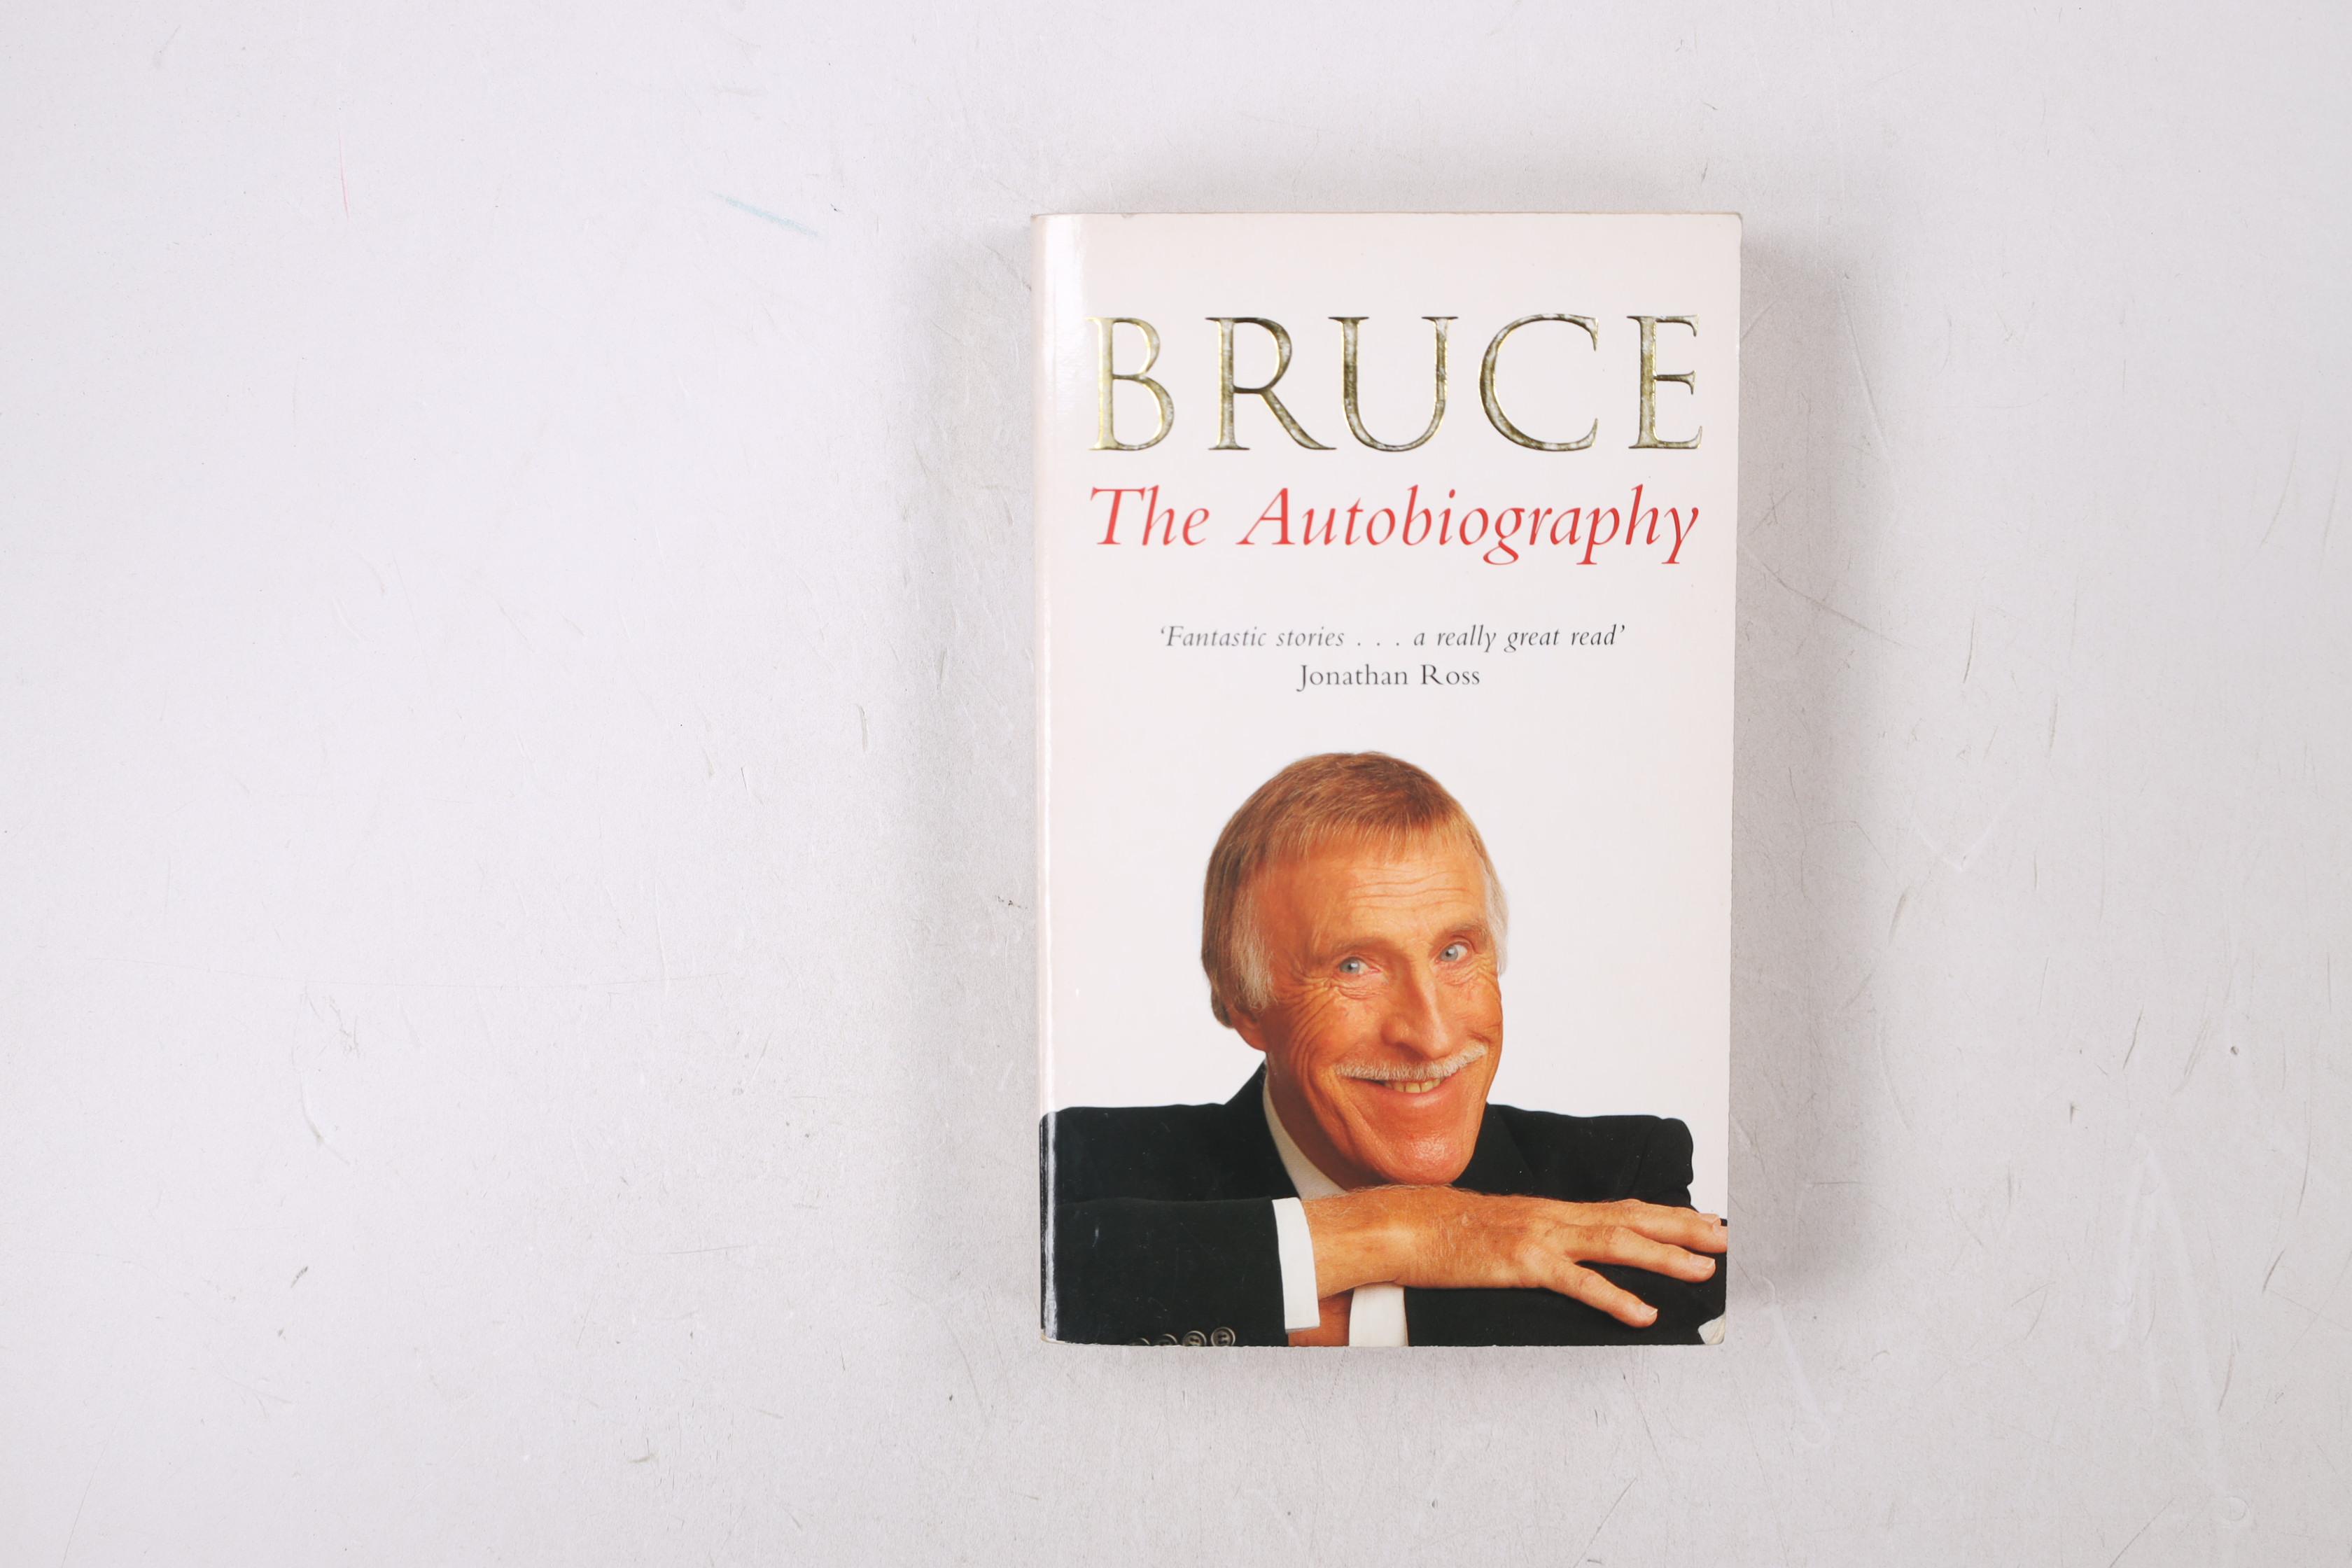 BRUCE. The Autobiography - Forsyth, Bruce